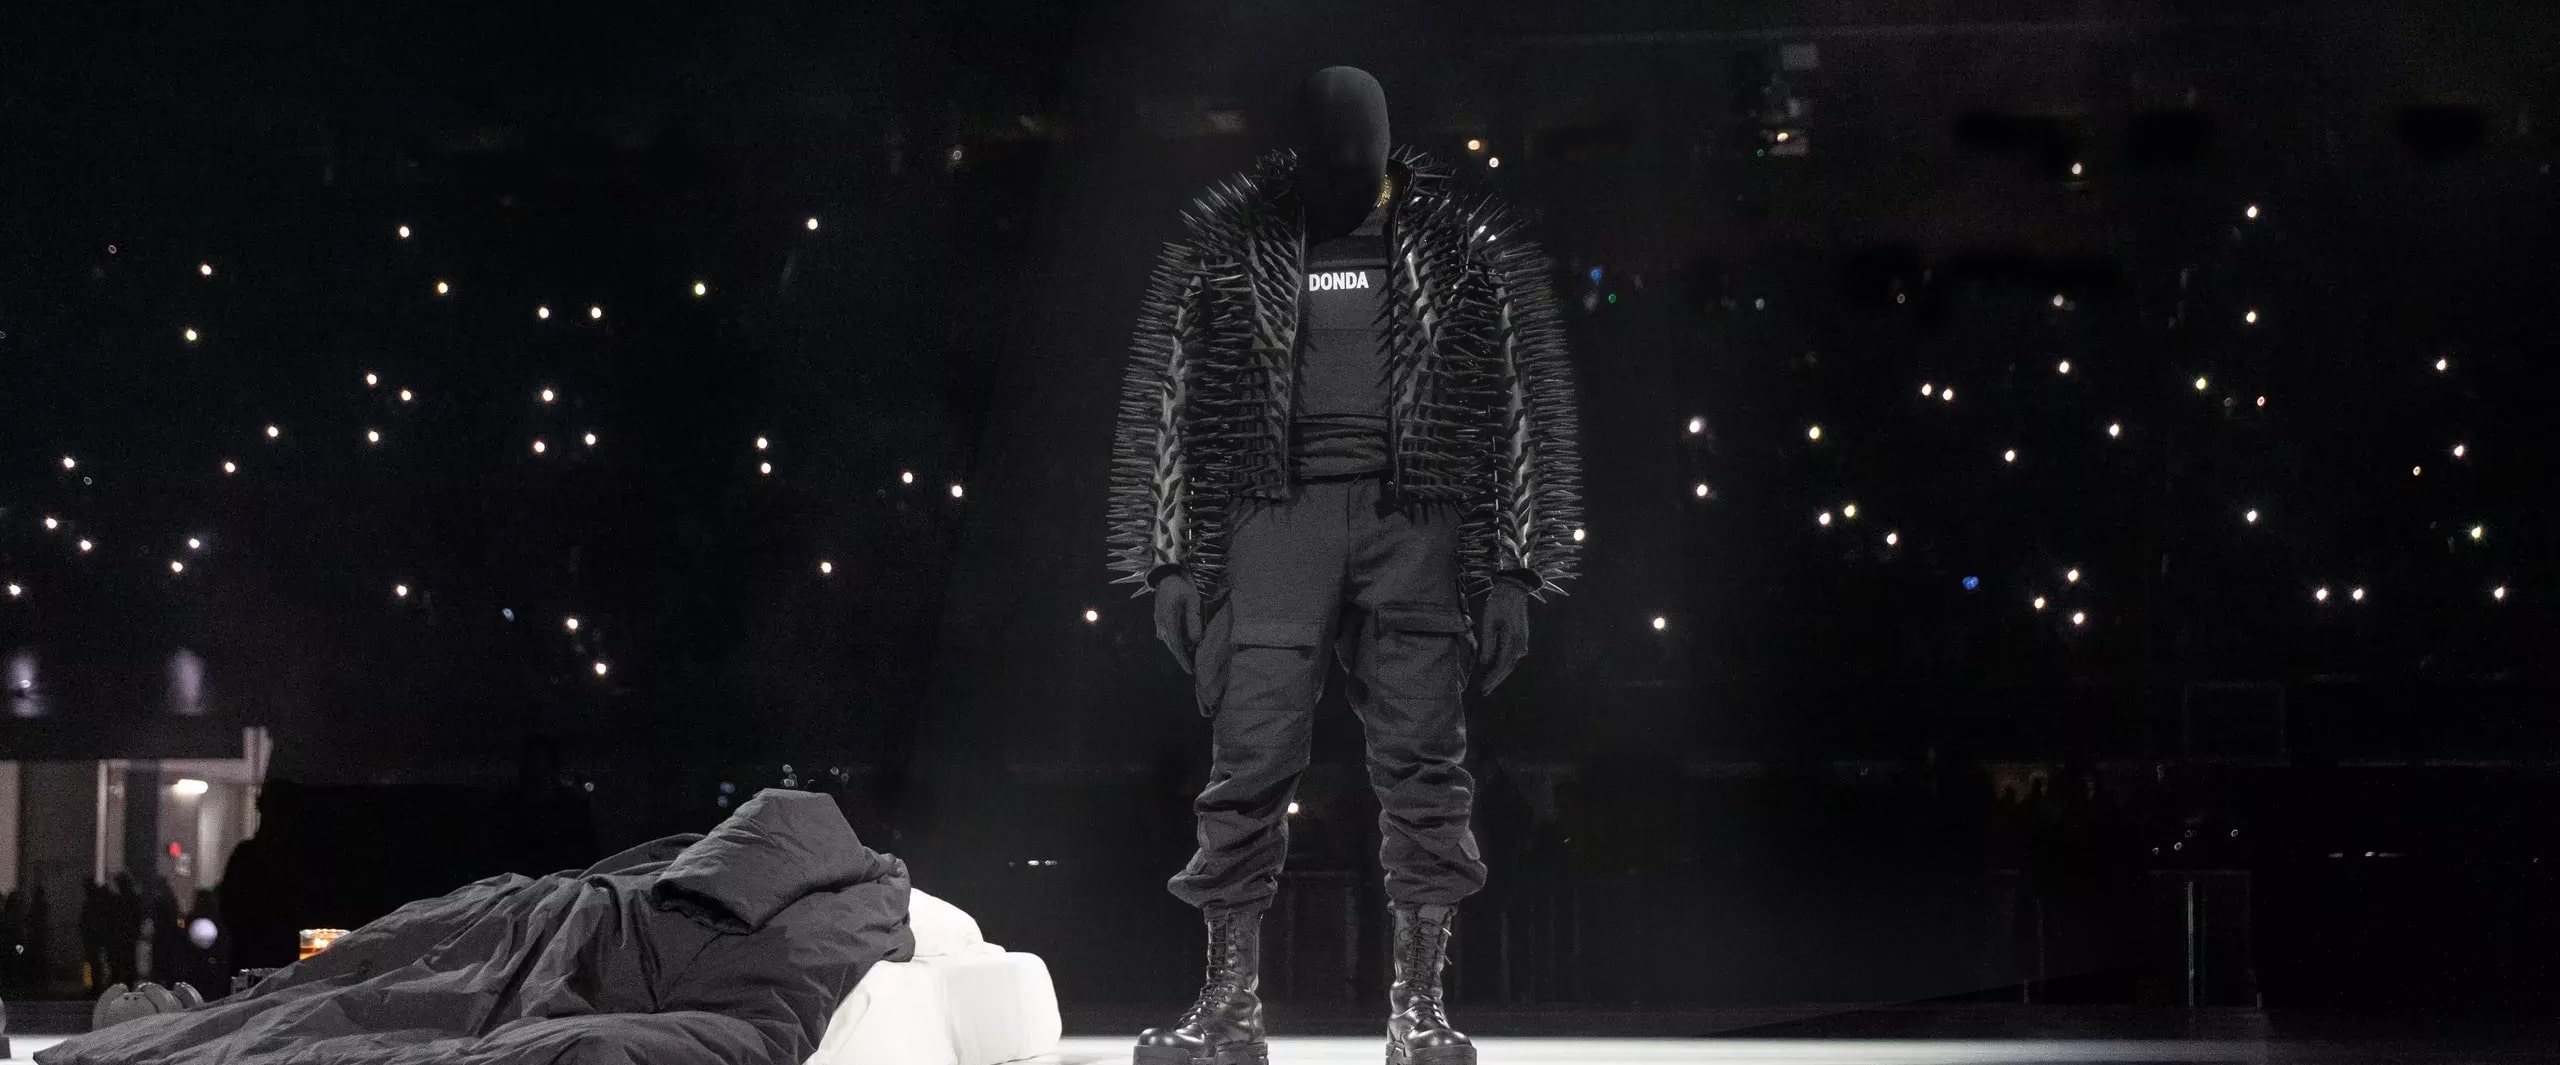 The Highlights and Lowlights of Kanye West's Donda 2 Streaming Event